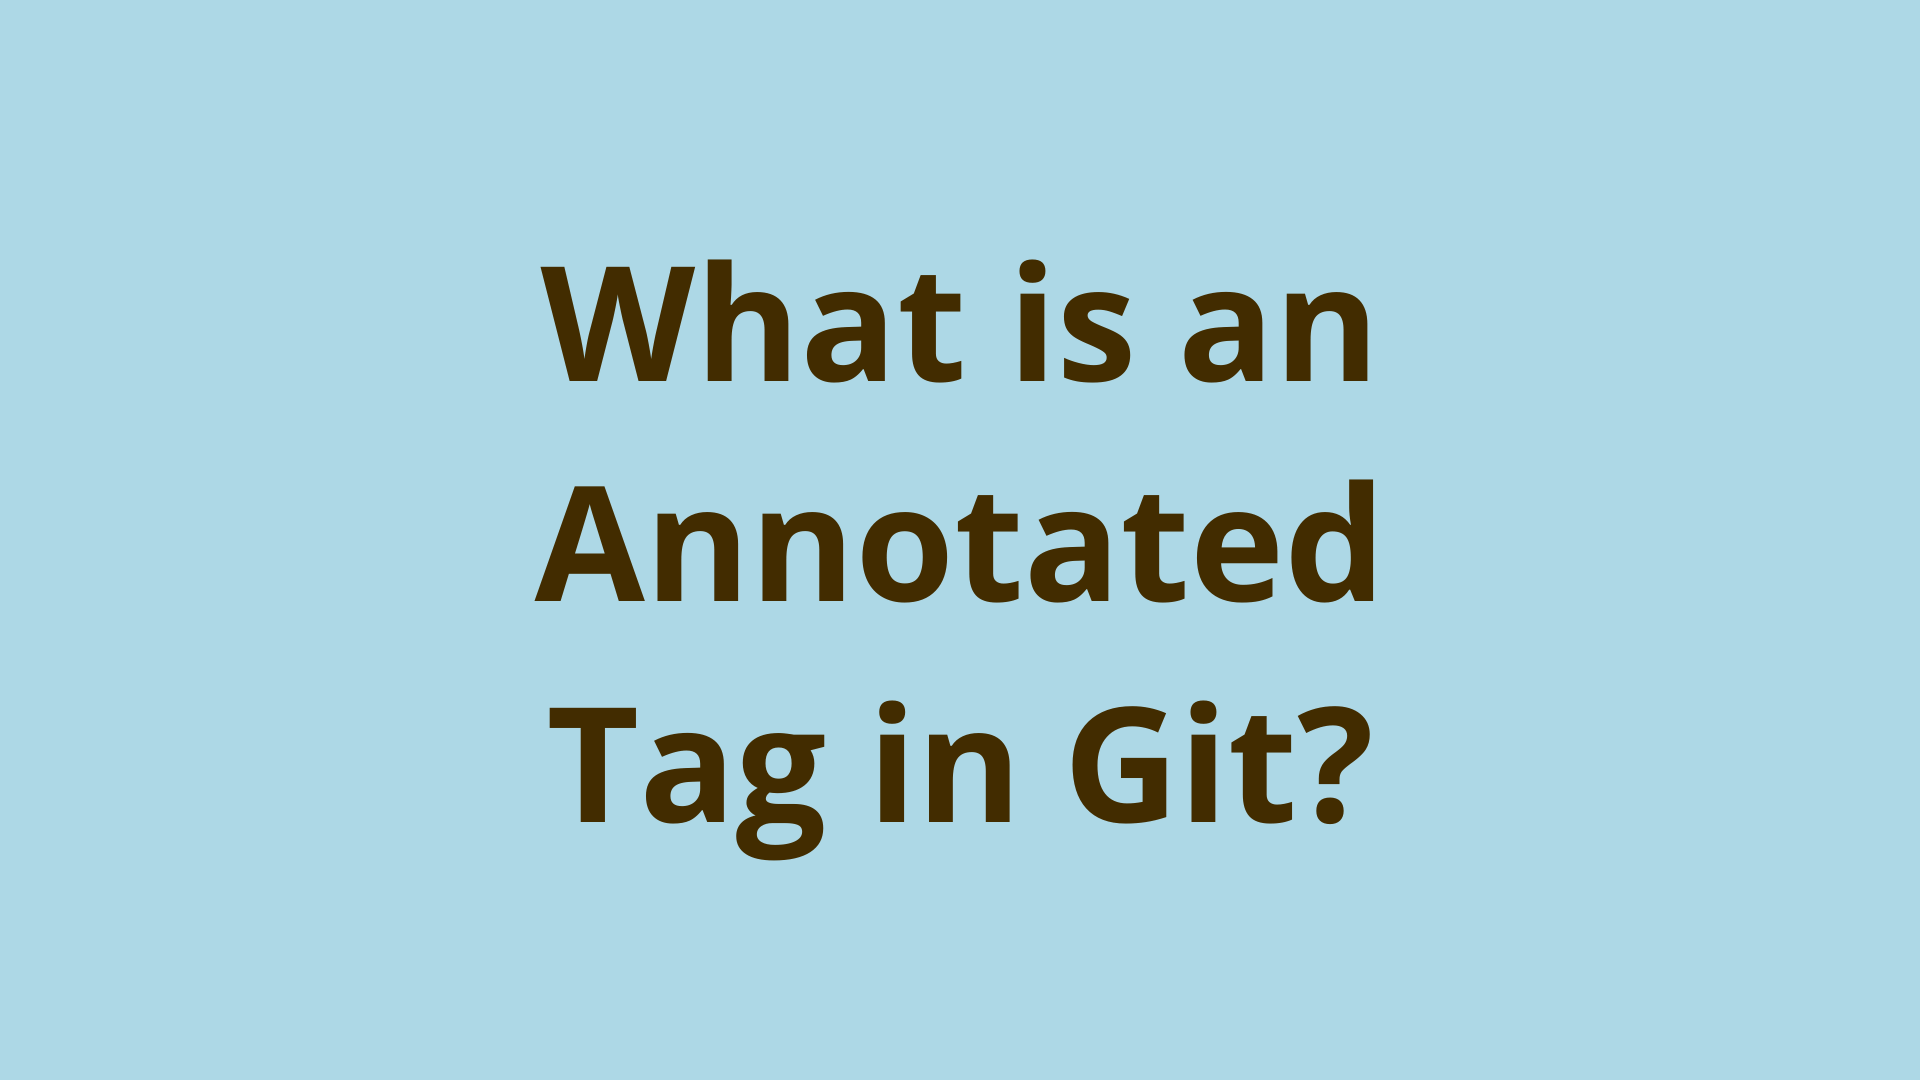 Image of What is an Annotated Tag in Git?